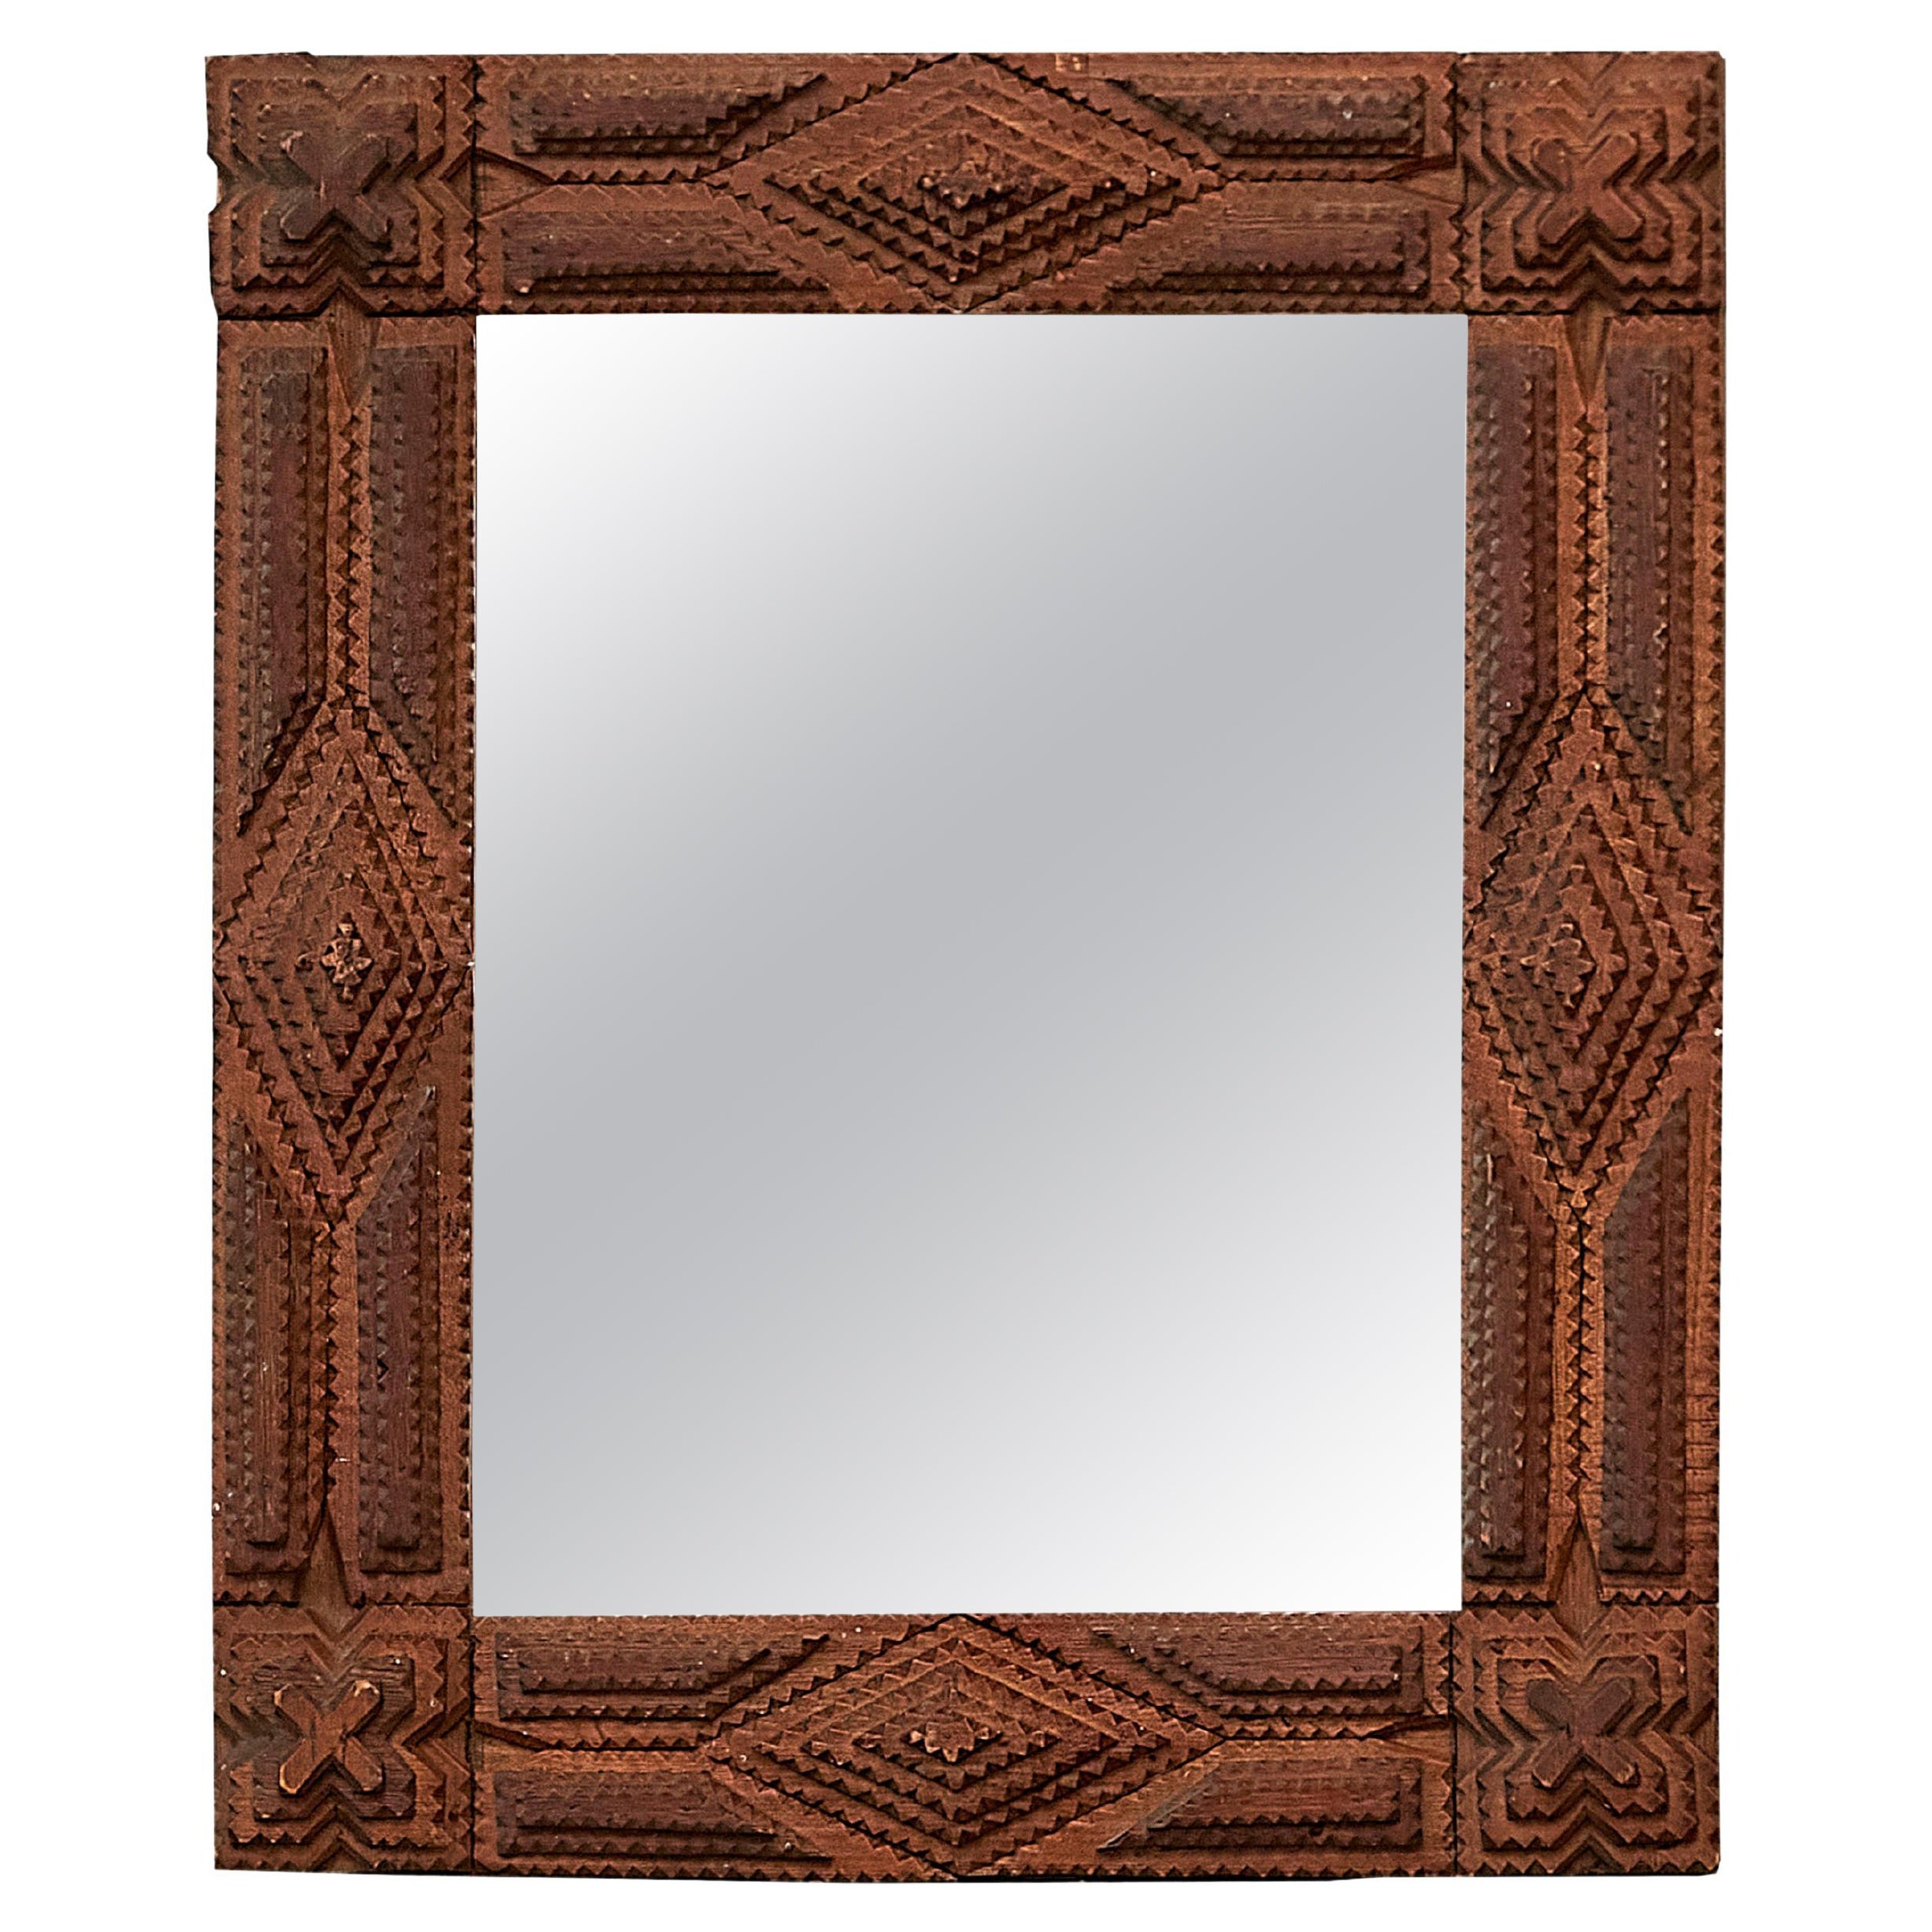 French 1900s Hand Carved Tramp Art Mirror with Raised Diamond Motifs For Sale